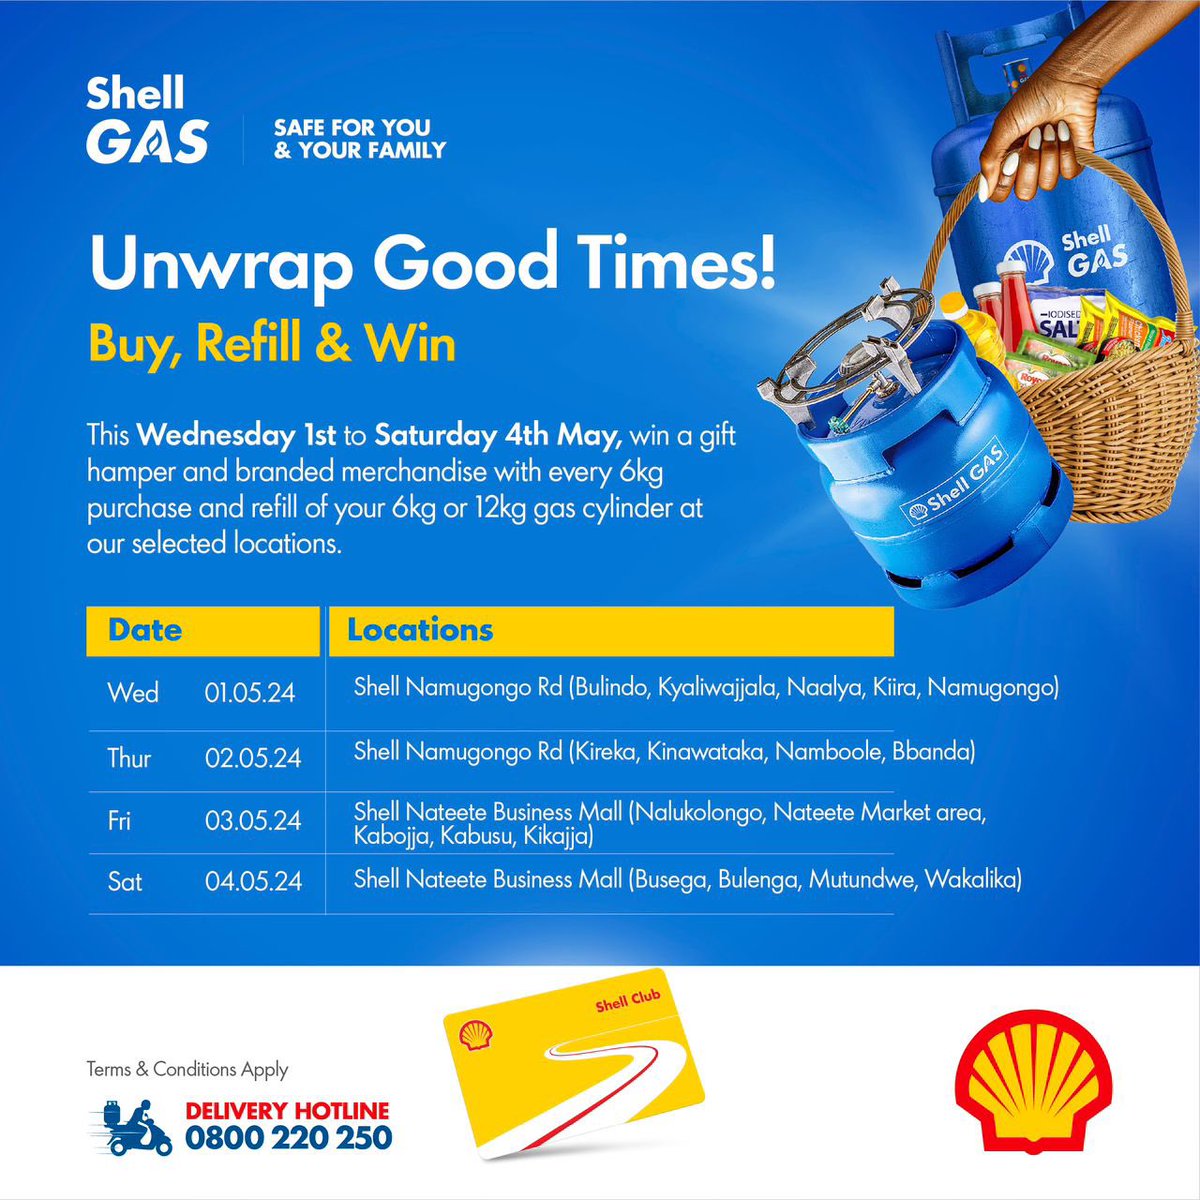 Holidays are here and this is a perfect time to refill your gas! Shell Gas is giving us these amazing offers and you can pass by Shell Namugongo today for a new purchase or a refill. 🔥 #ShellGasBuyRefillWin